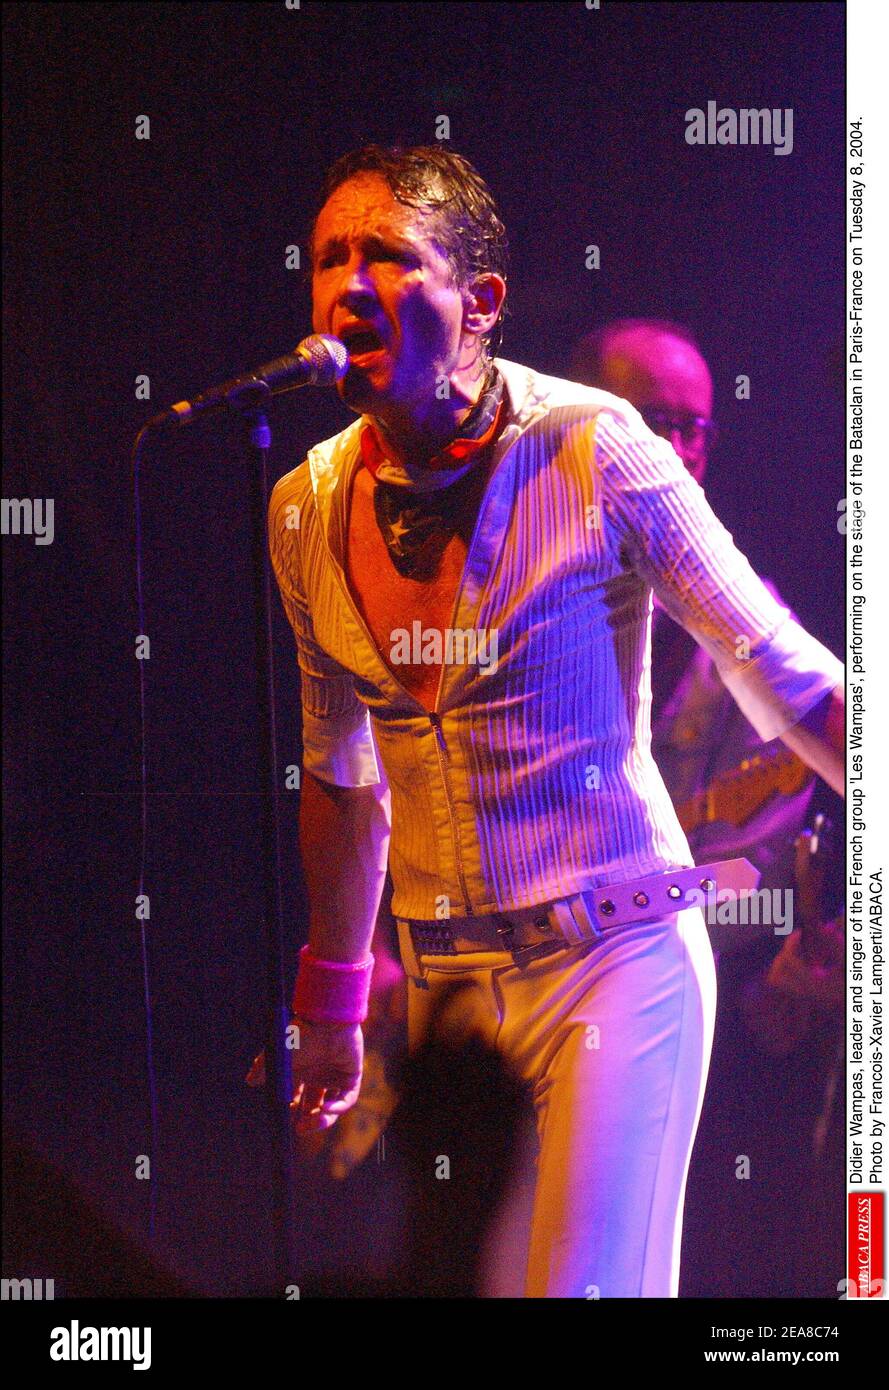 Didier Wampas, leader and singer of the French group 'Les Wampas', performing on the stage of the Bataclan in Paris-France on Tuesday 8, 2004. Photo by Francois-Xavier Lamperti/ABACA. Stock Photo